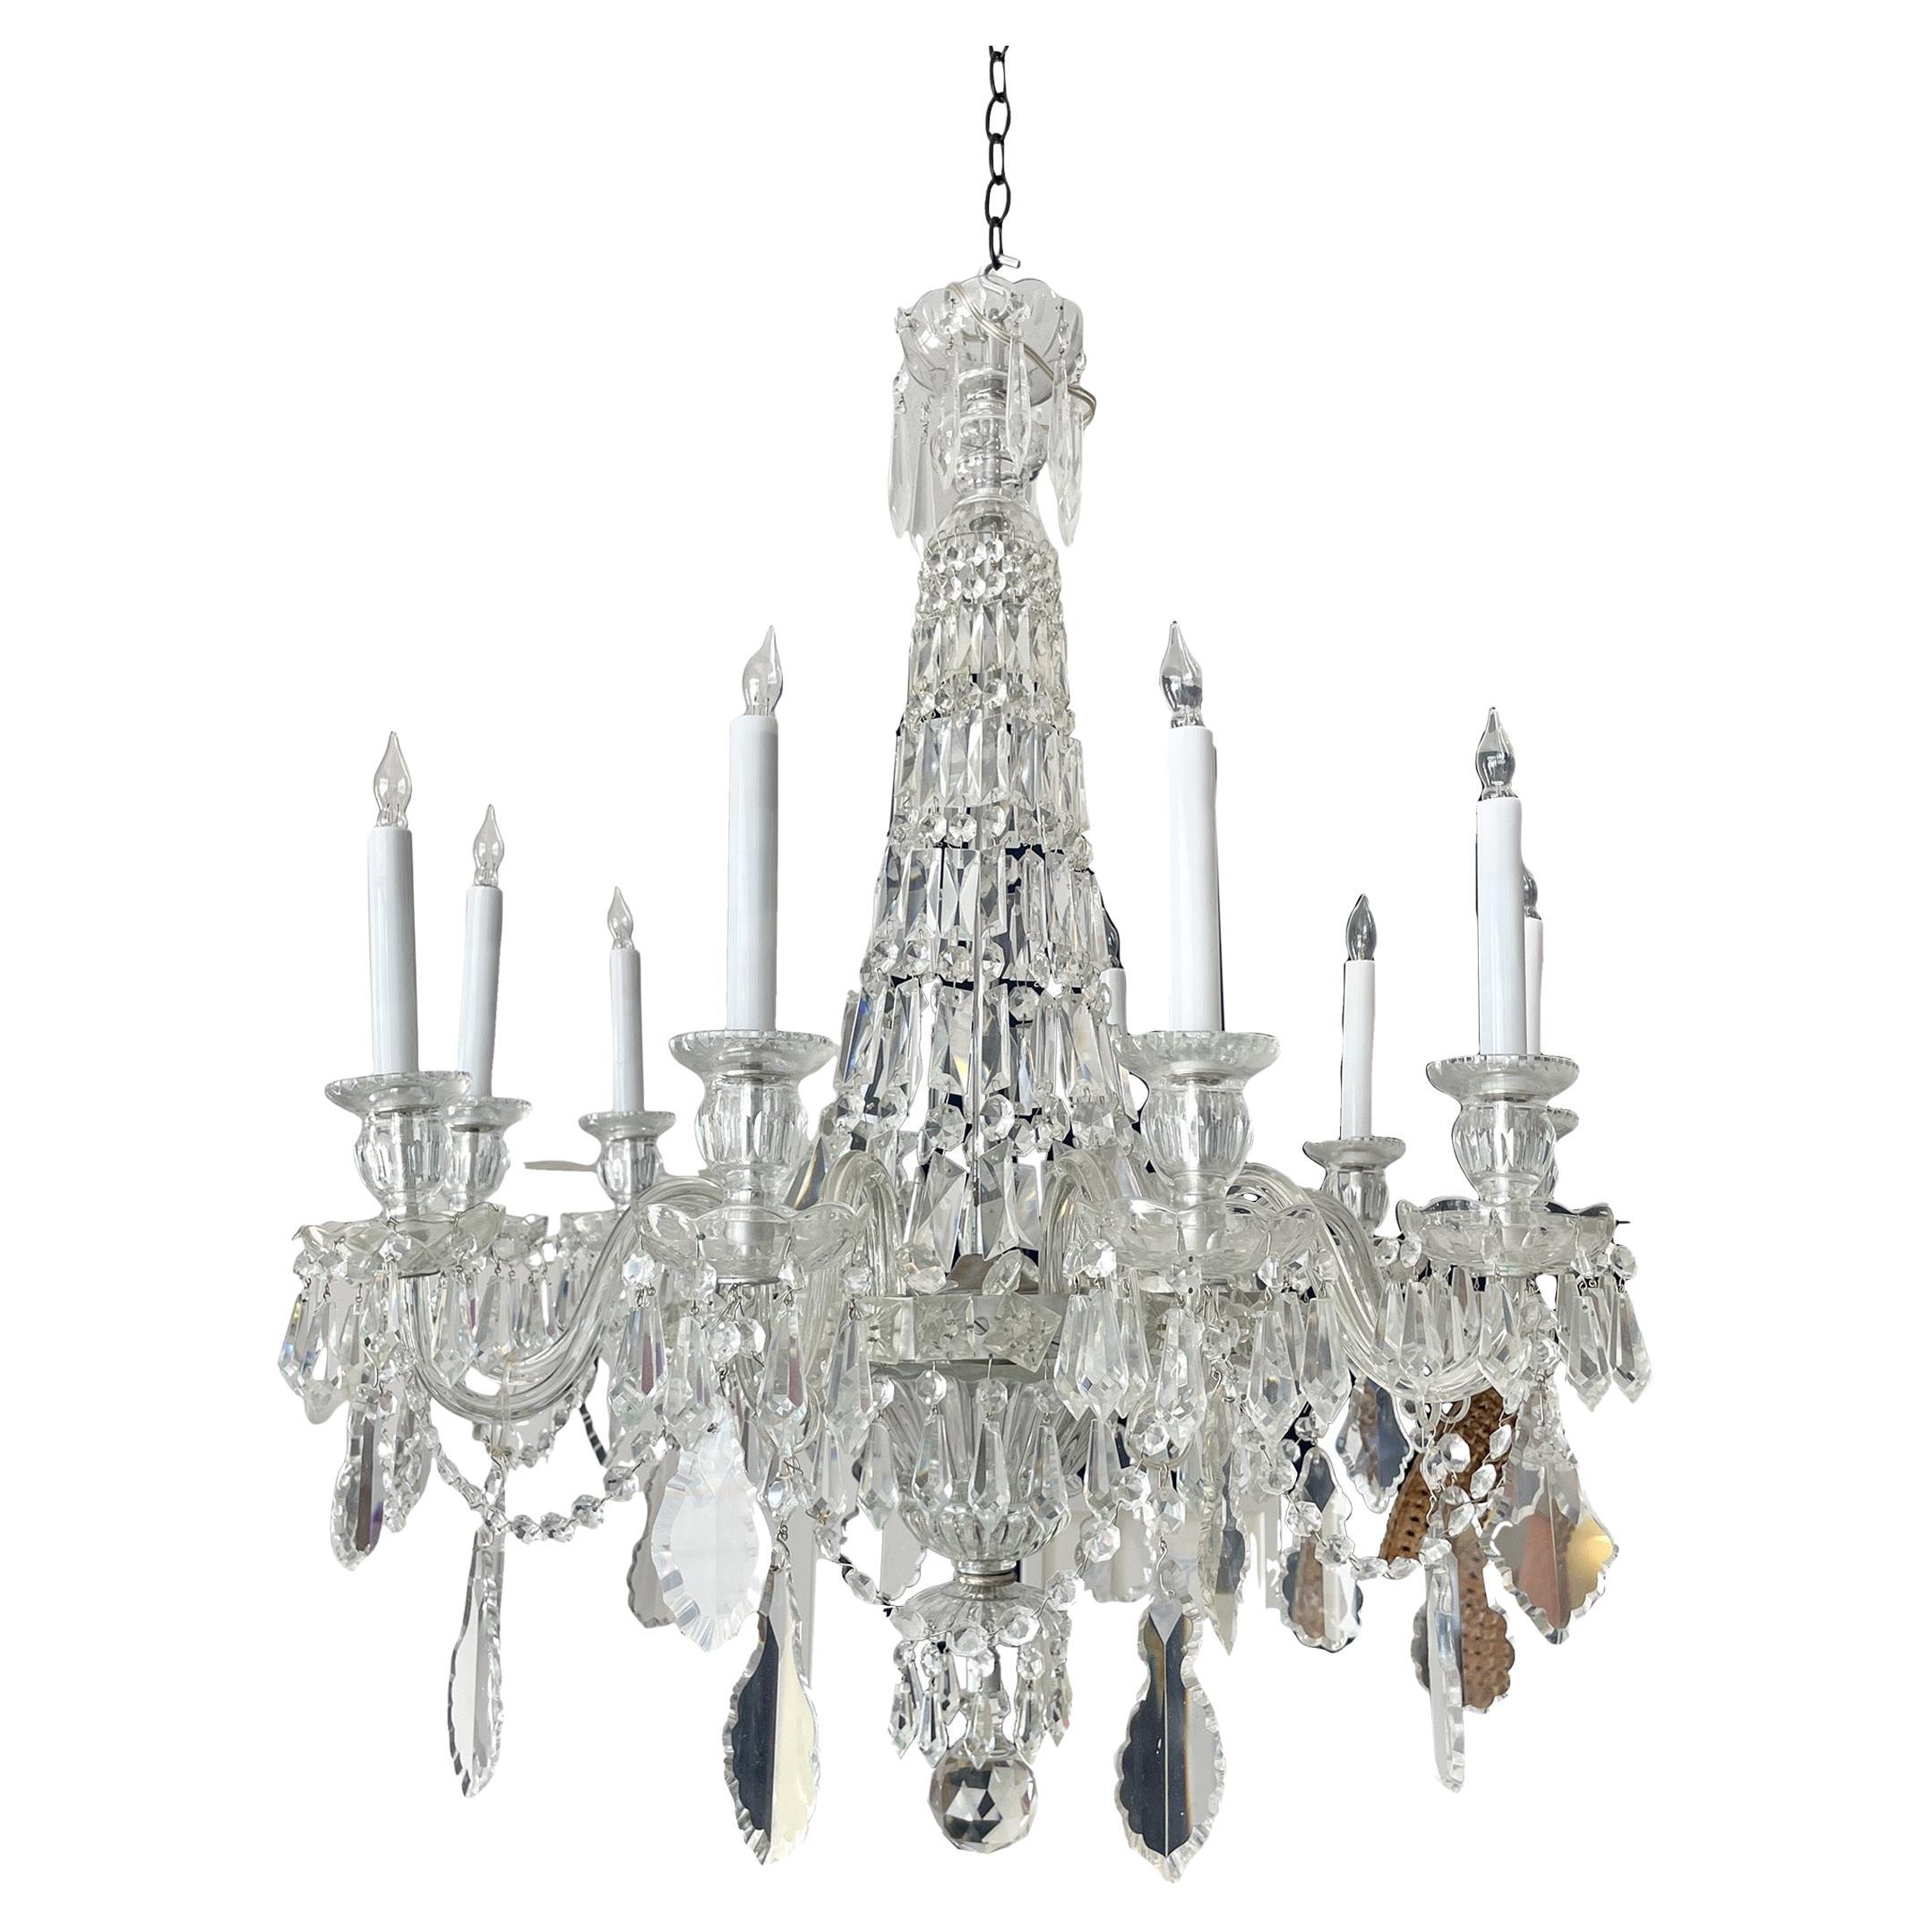 19th Century Russian Crystal Chandelier